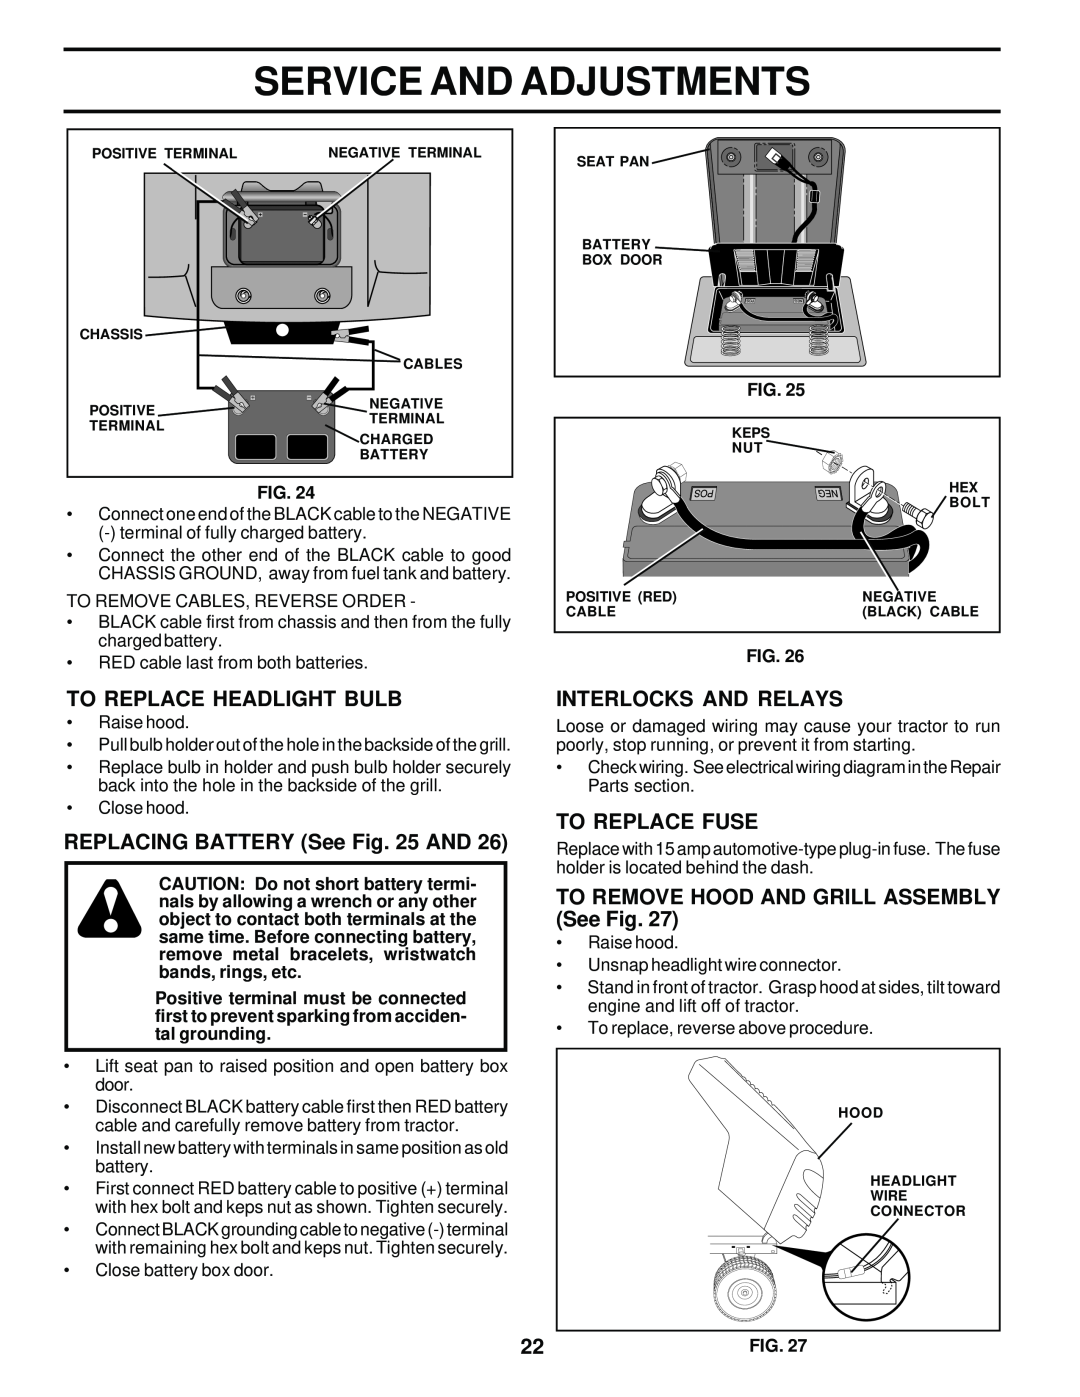 Weed Eater 171883 manual To Replace Headlight Bulb, REPLACING BATTERY See AND, Interlocks And Relays, To Replace Fuse 